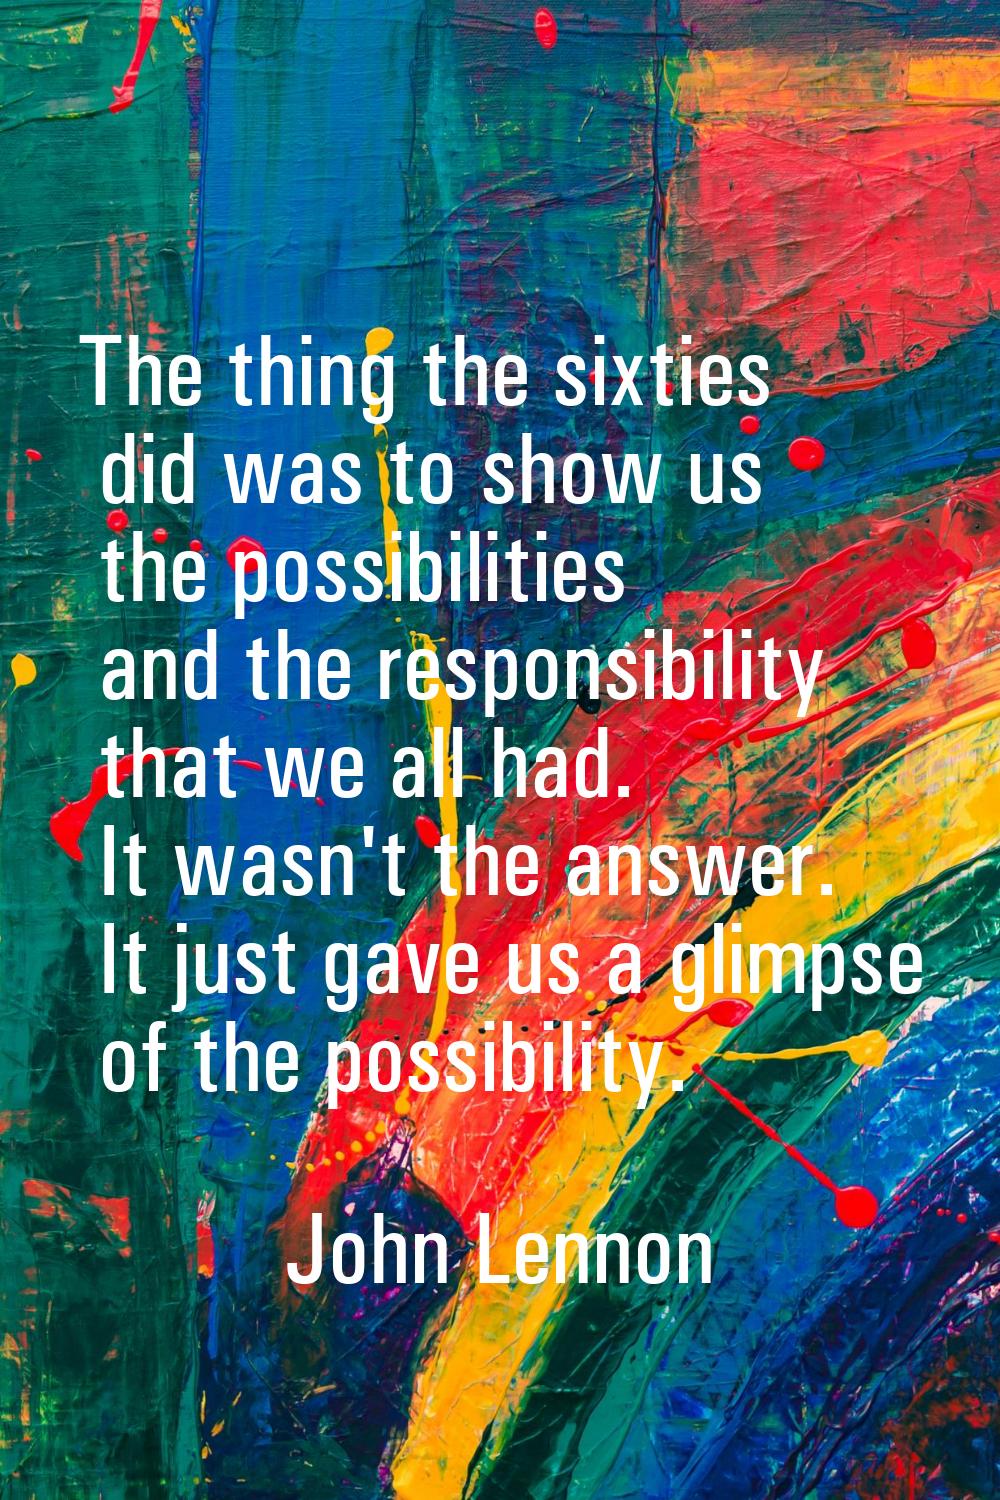 The thing the sixties did was to show us the possibilities and the responsibility that we all had. 